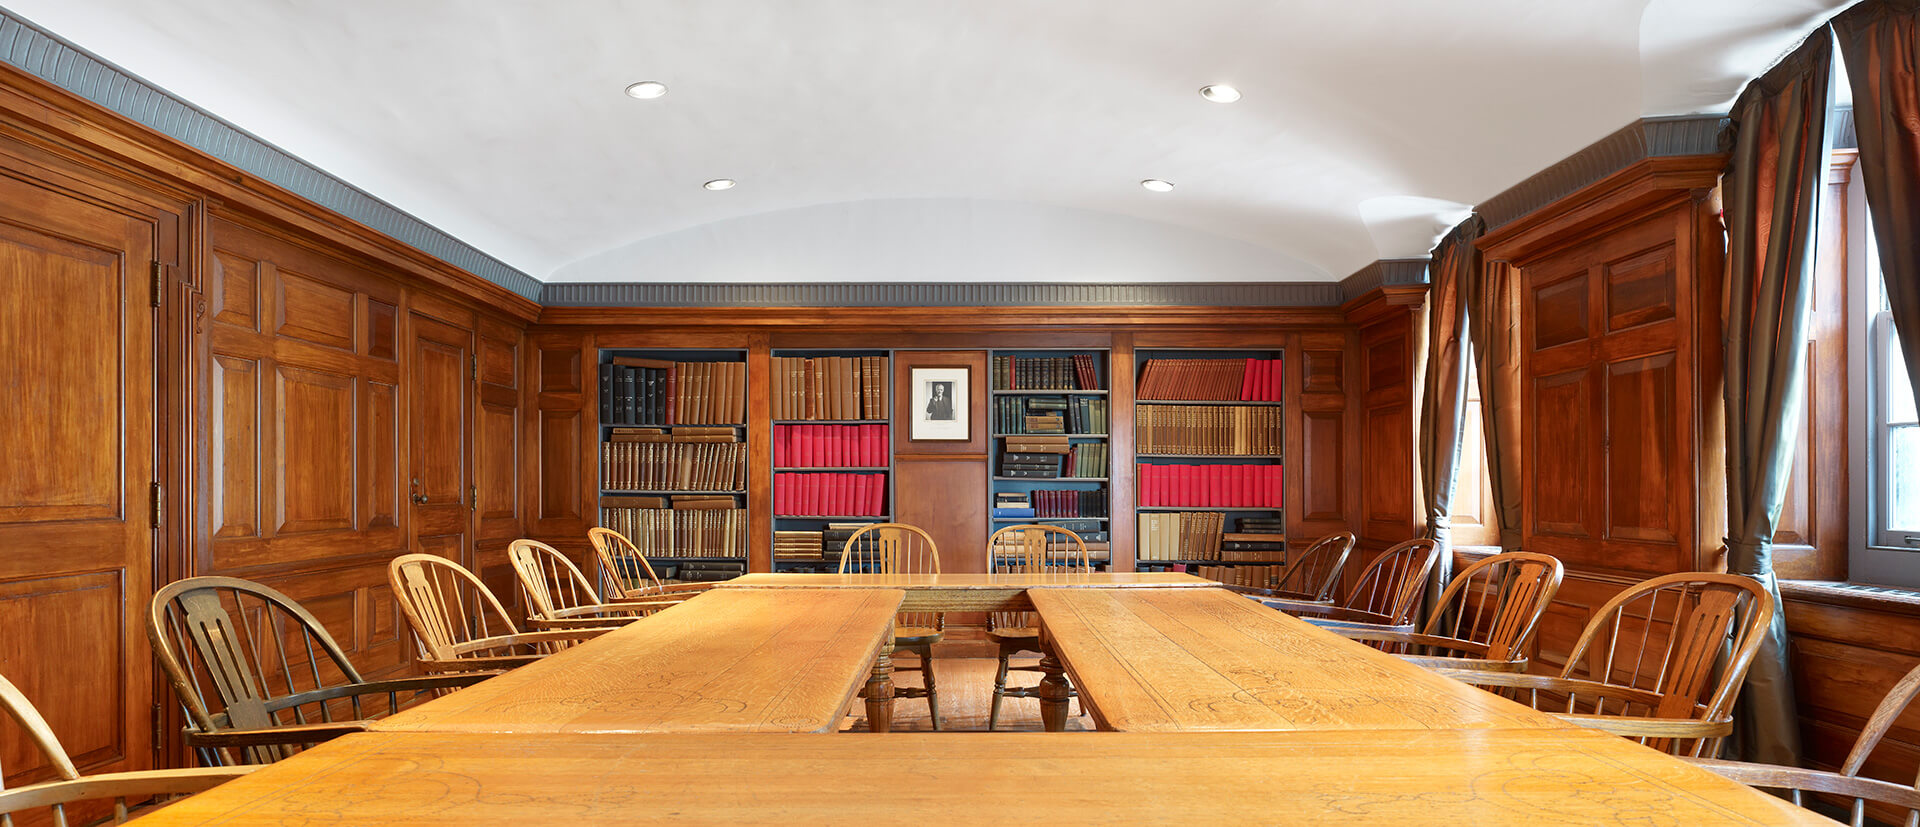 A large meeting table set in a room with oak paneling, bookcases, a fireplace, and period tables and chairs.